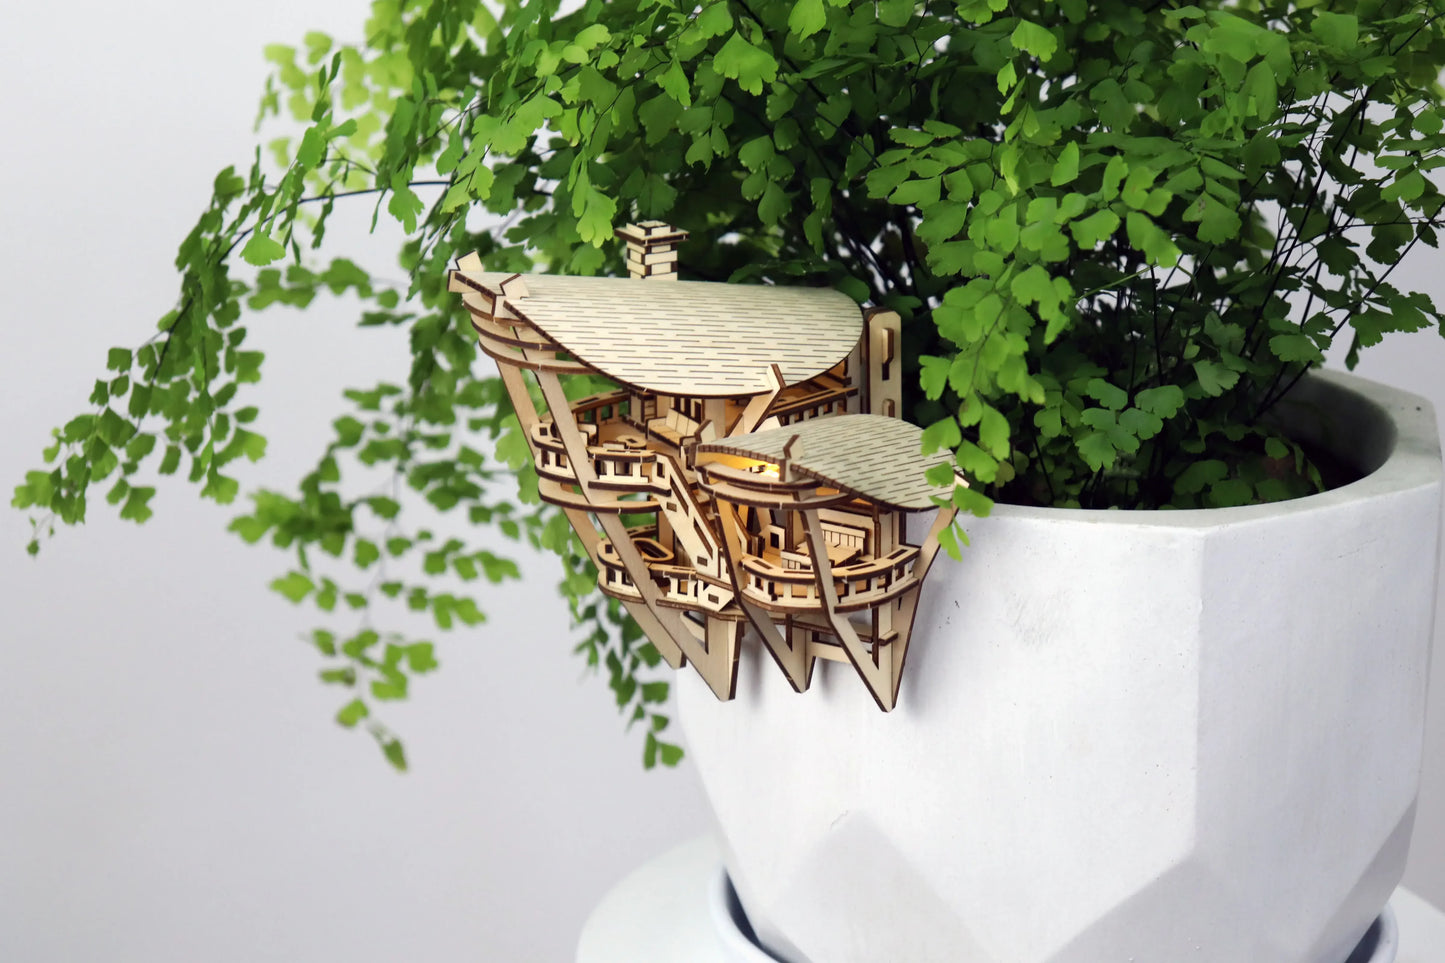 Small wooden treehouse hanging on side of white pot.